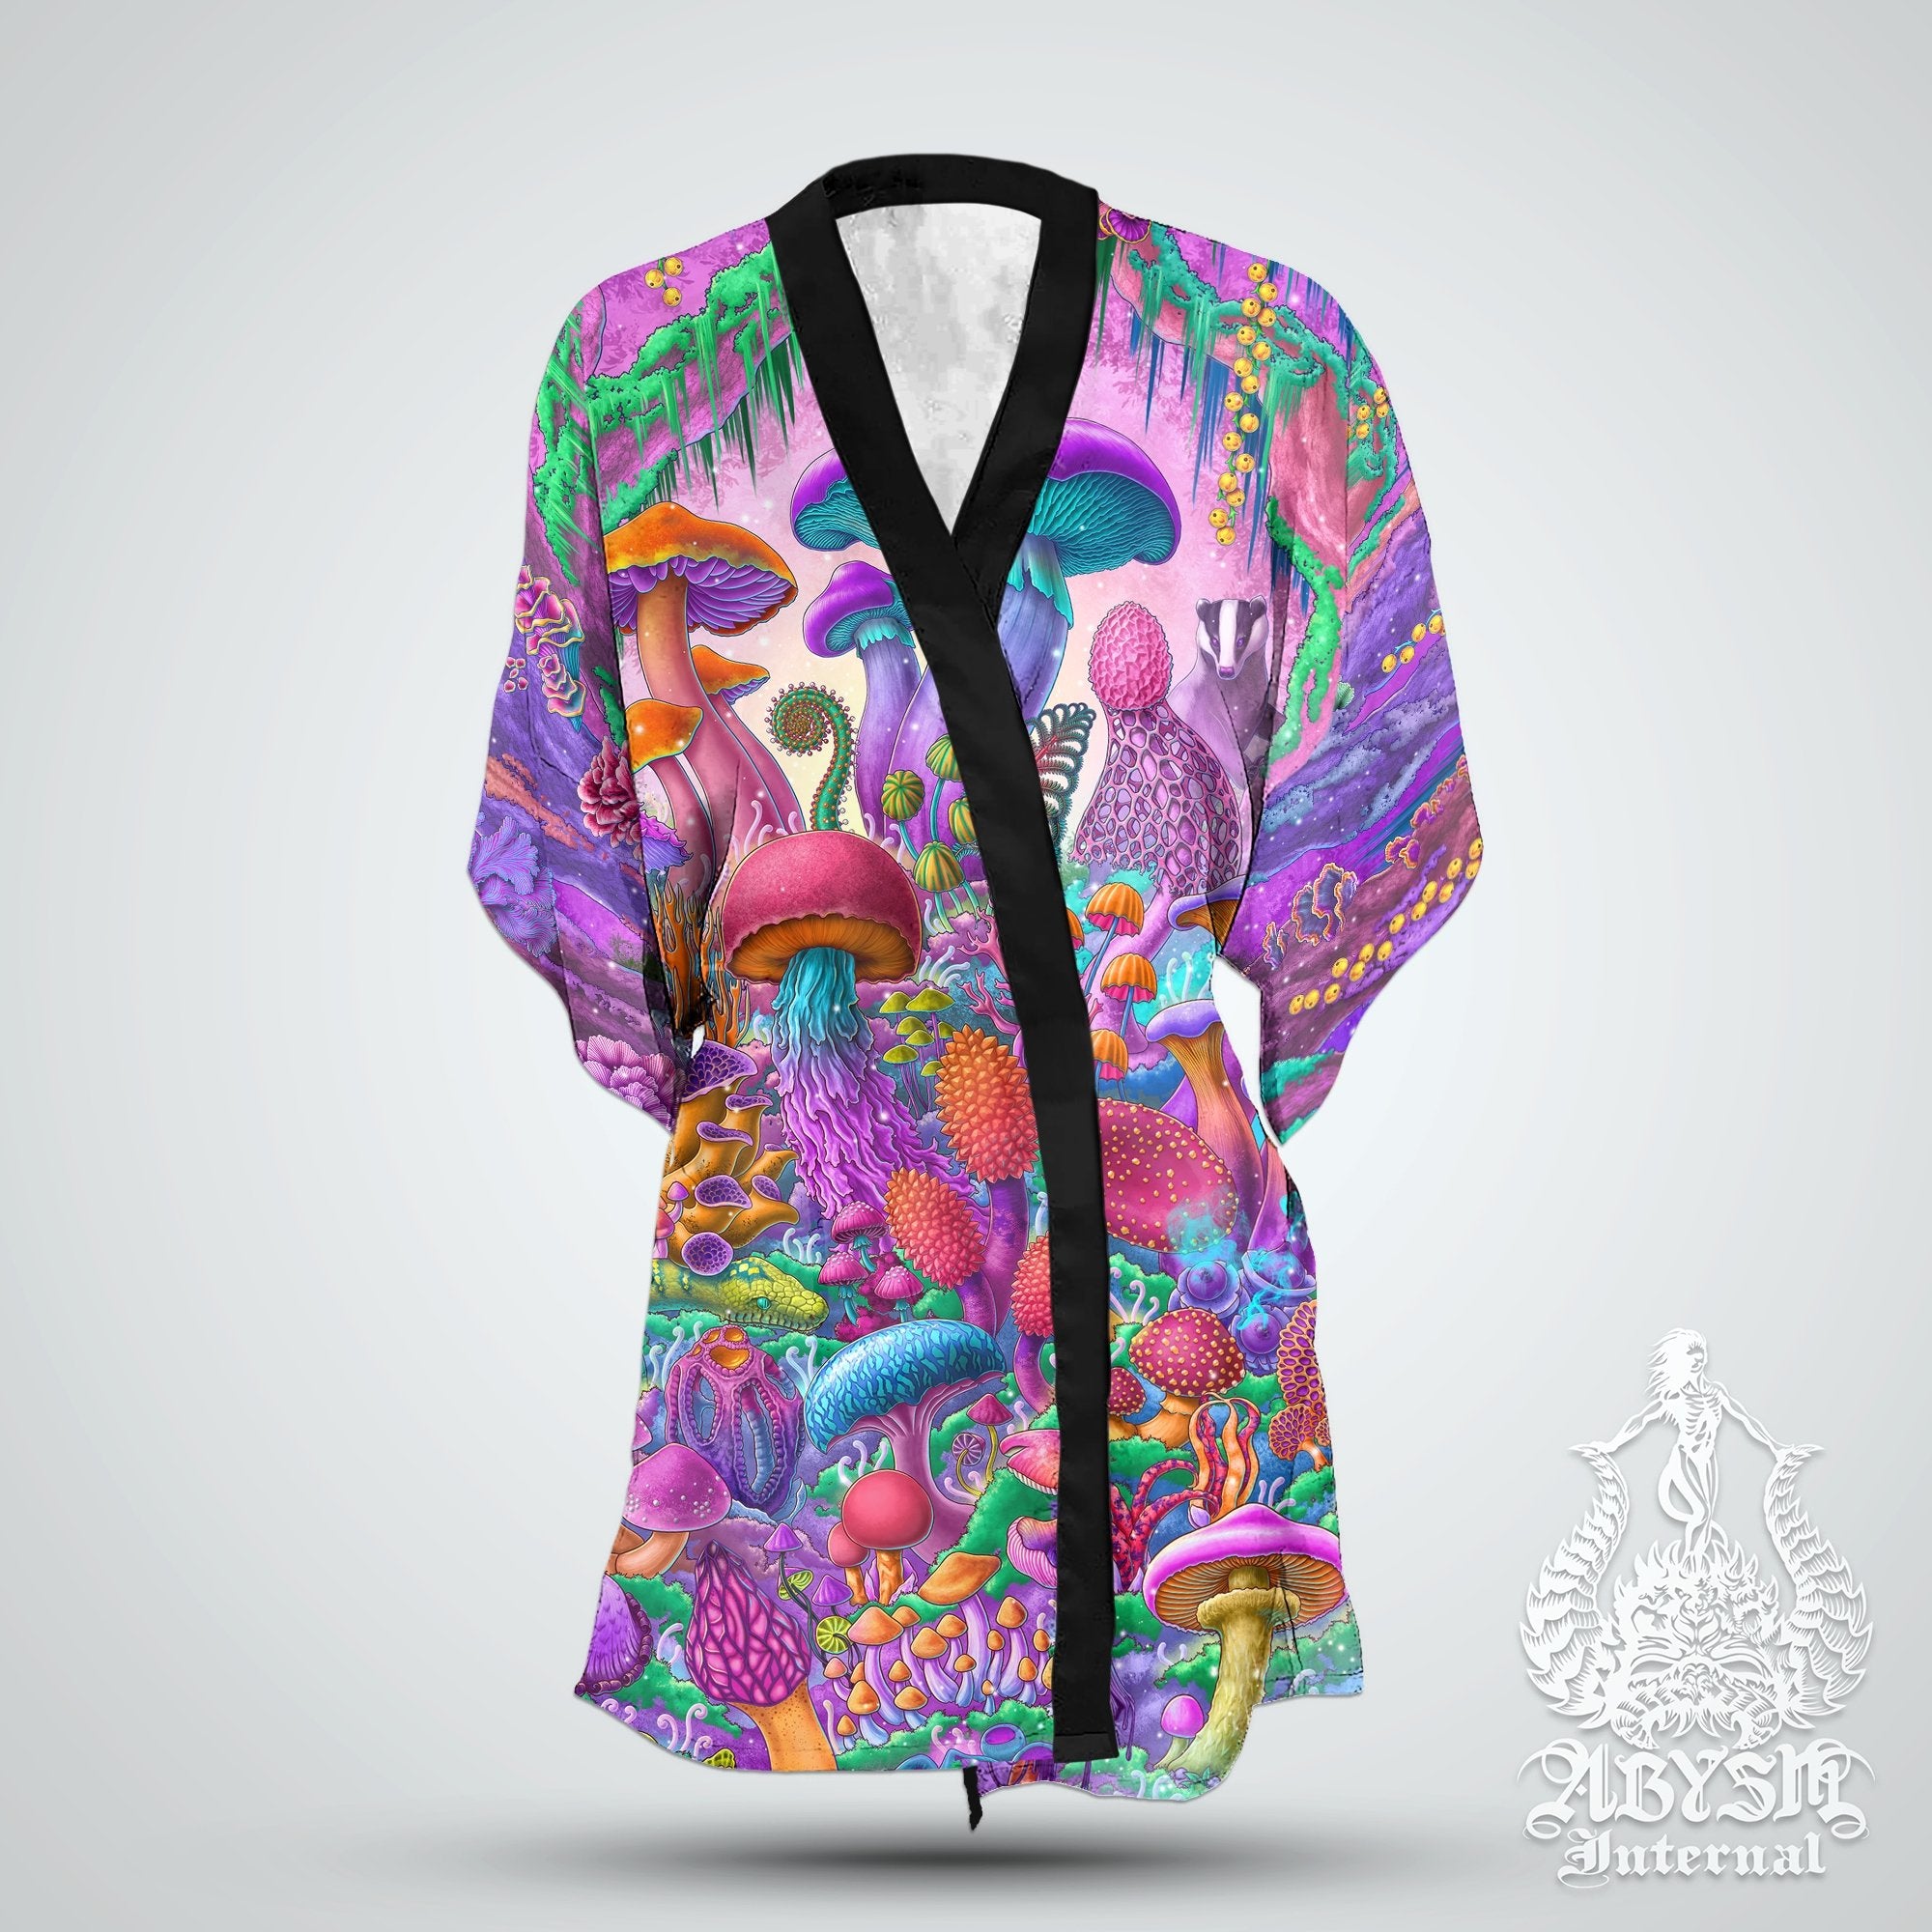 Pastel Mushrooms Cover Up, Aesthetic Outfit, Indie Party Kimono, Summer Festival Robe, Psychedelic Magic Shrooms Gift, Alternative Clothing, Unisex - Abysm Internal